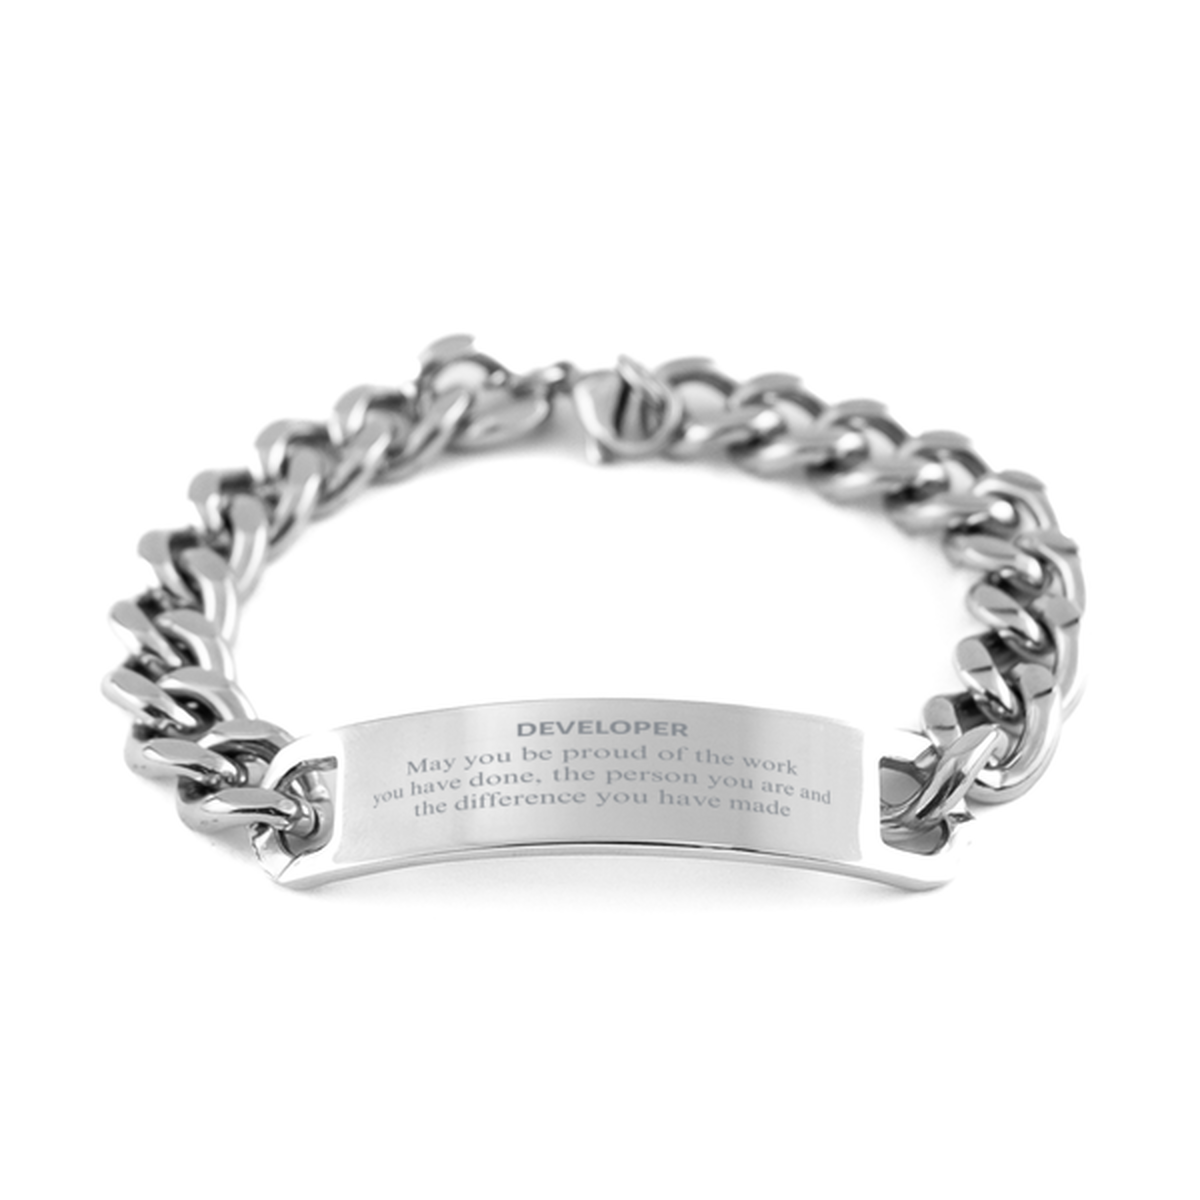 Developer May you be proud of the work you have done, Retirement Developer Cuban Chain Stainless Steel Bracelet for Colleague Appreciation Gifts Amazing for Developer